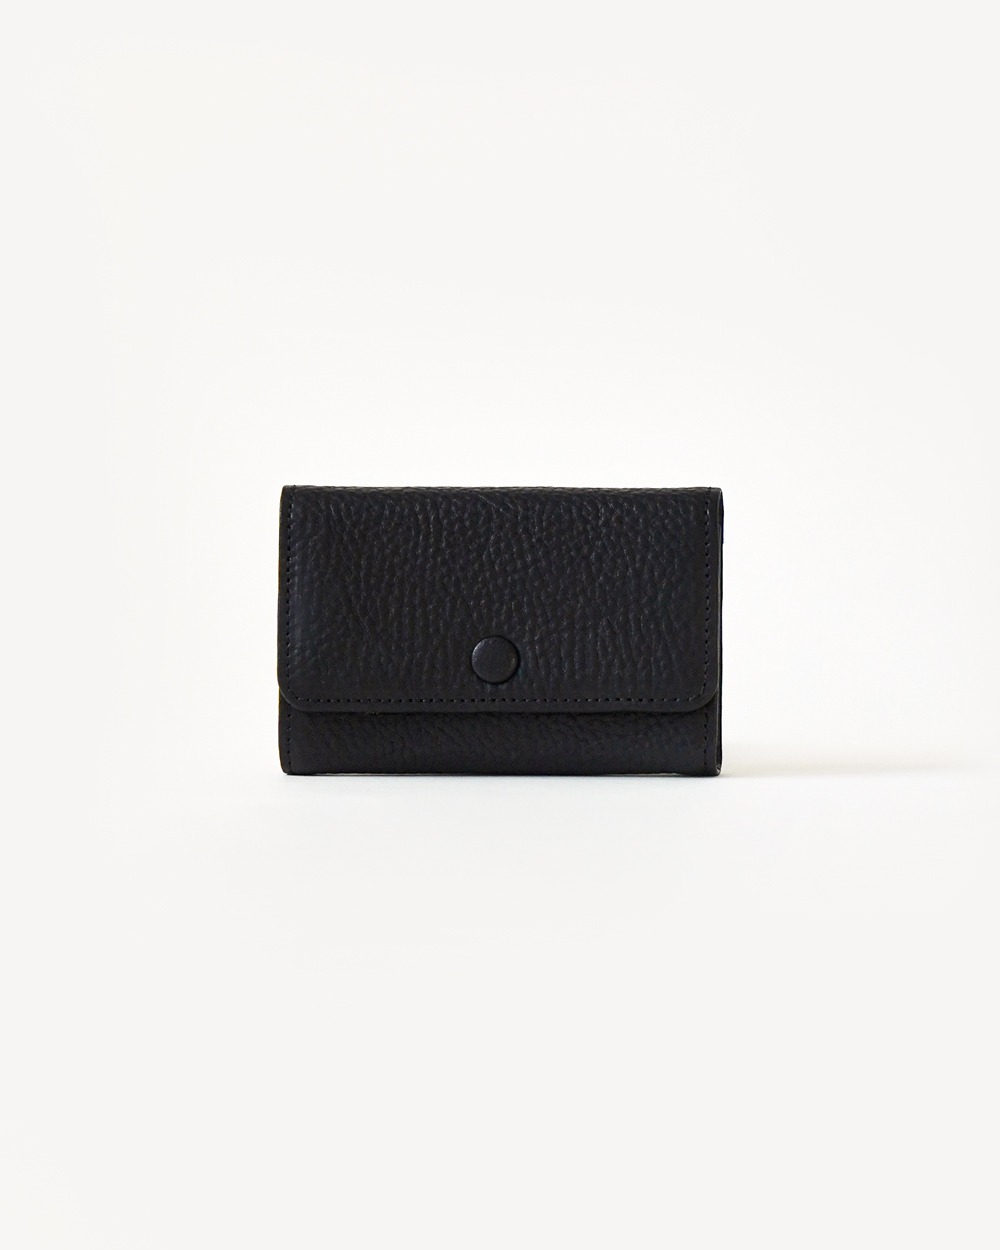 [Vege-tanned Leather] Classic Card Holder / Long Black